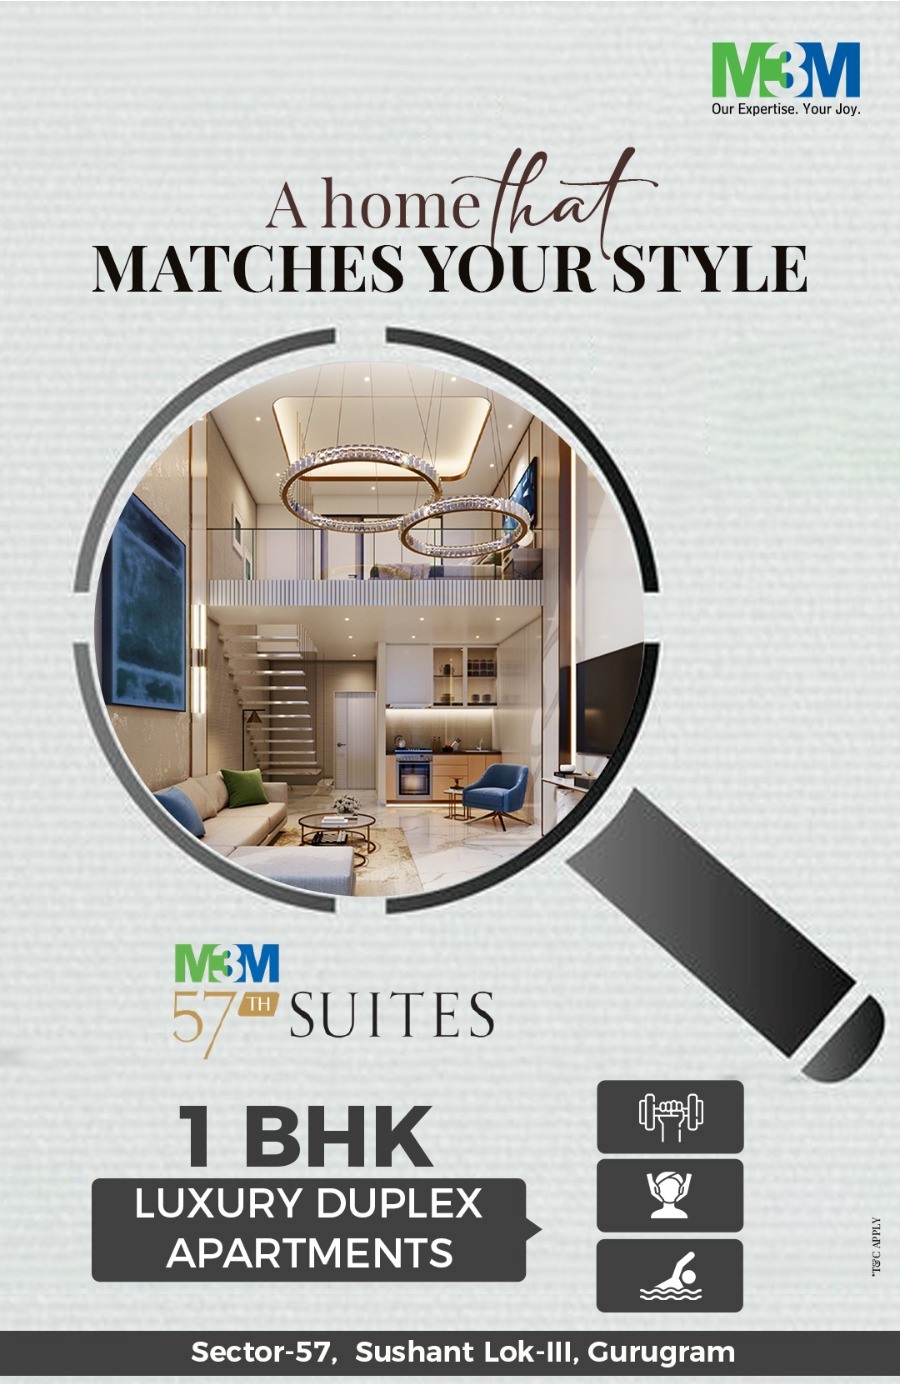 A home that matches your style at M3M 57th Suites, Gurgaon Update